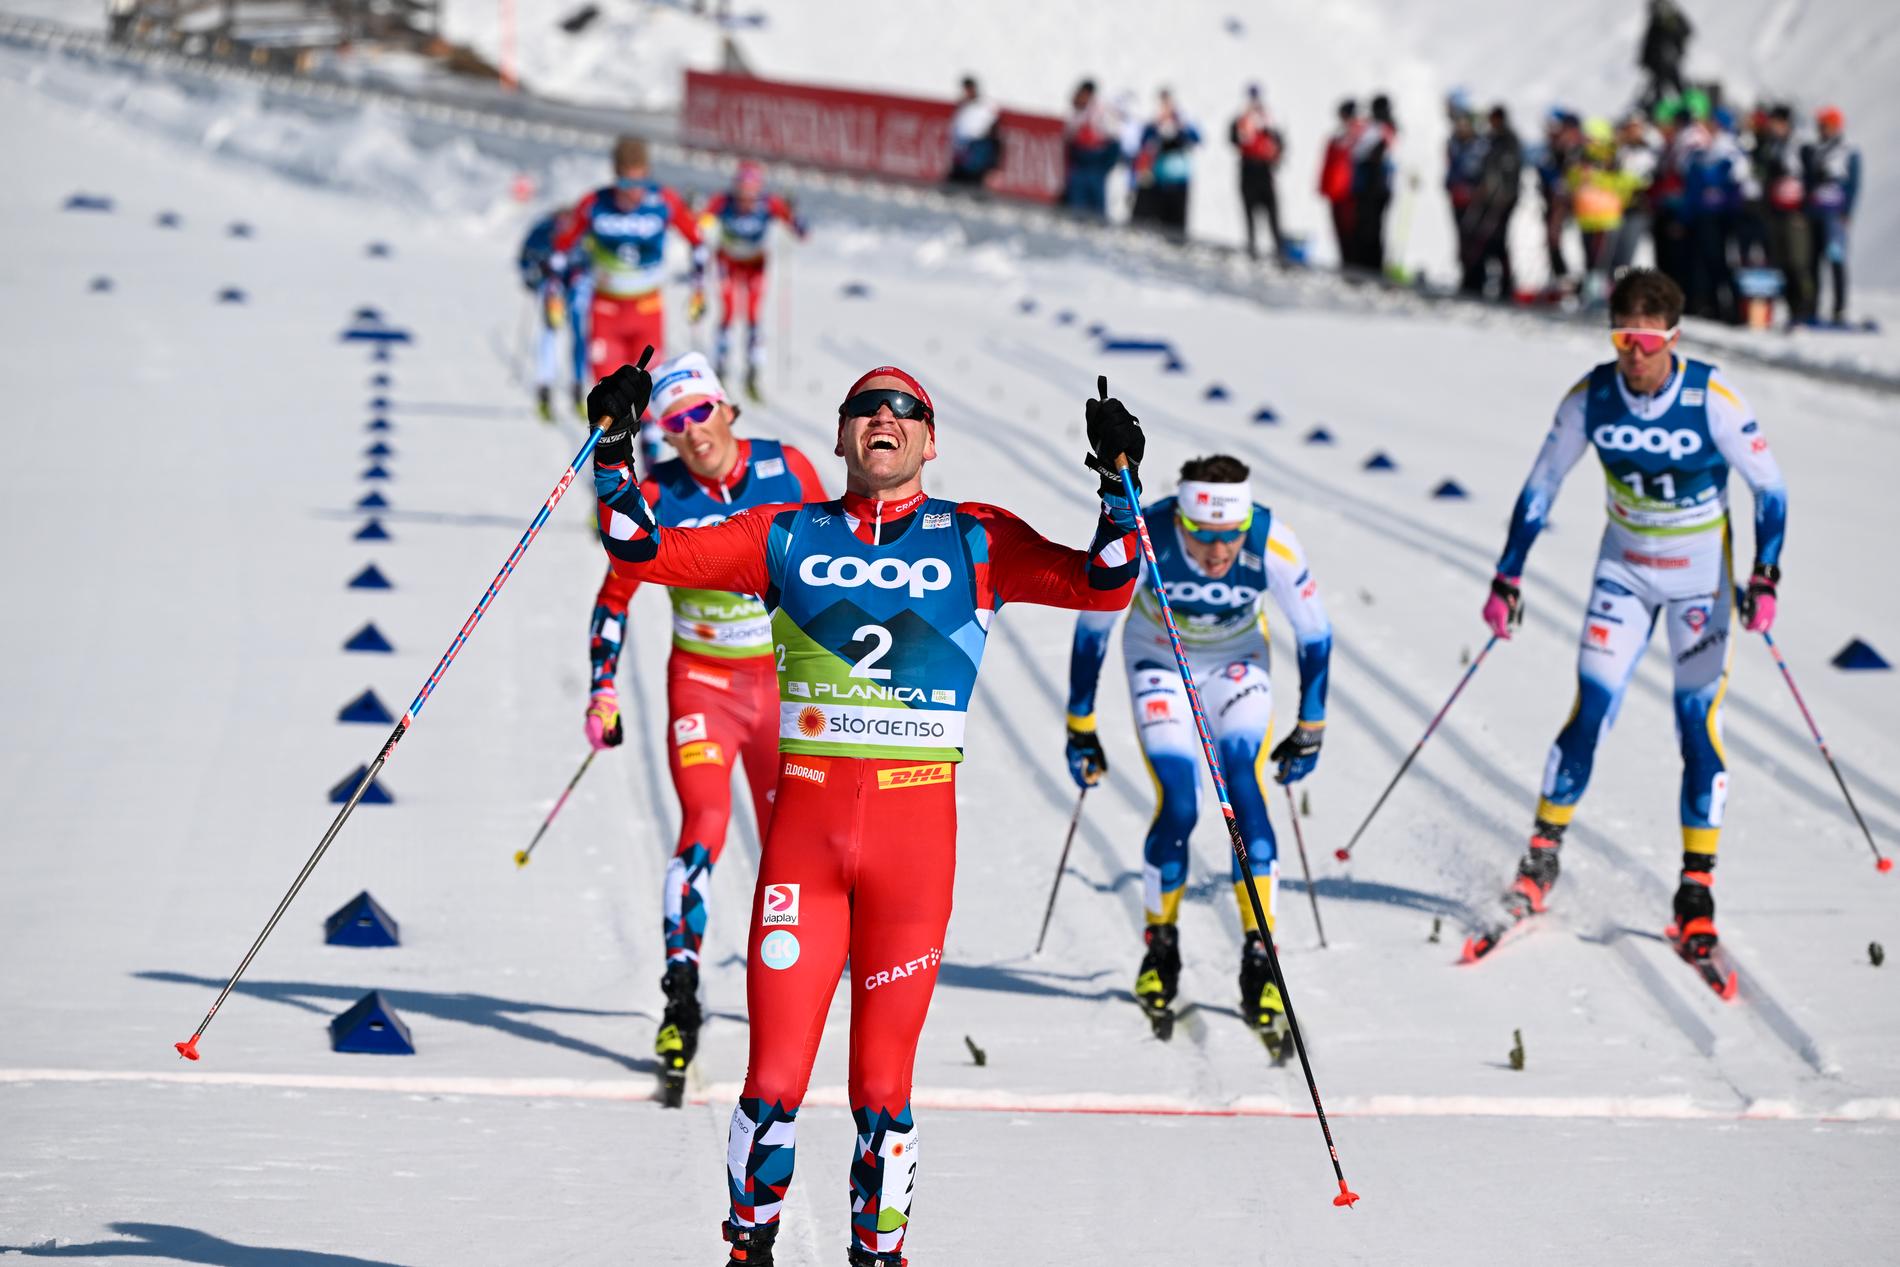 In recent years, cross-country skiing has been shown on Viaplay and TV 3. There was an exception in the ski toilet in Planica when Pål Golberg's five-mile gold medal was shown on both NRK and Viaplay.